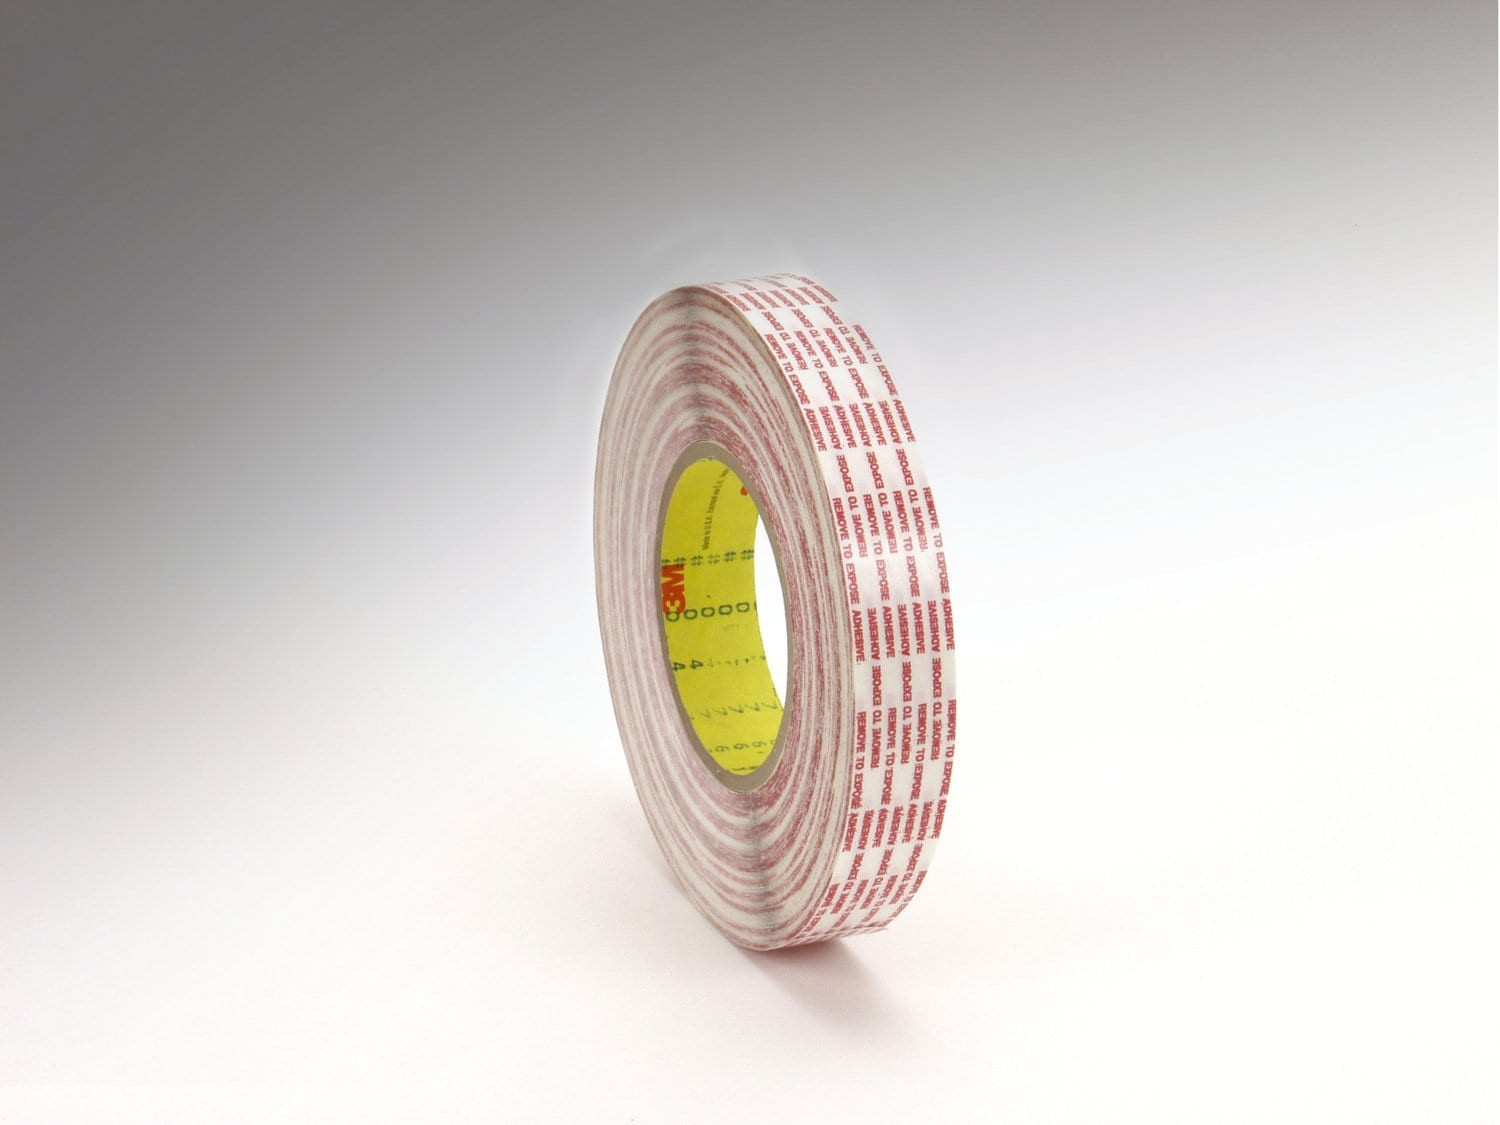 7000123713 - 3M Double Coated Tape Extended Liner 476XL, Translucent, 3/4 in x 540
yd, 6 mil, 8 rolls per case